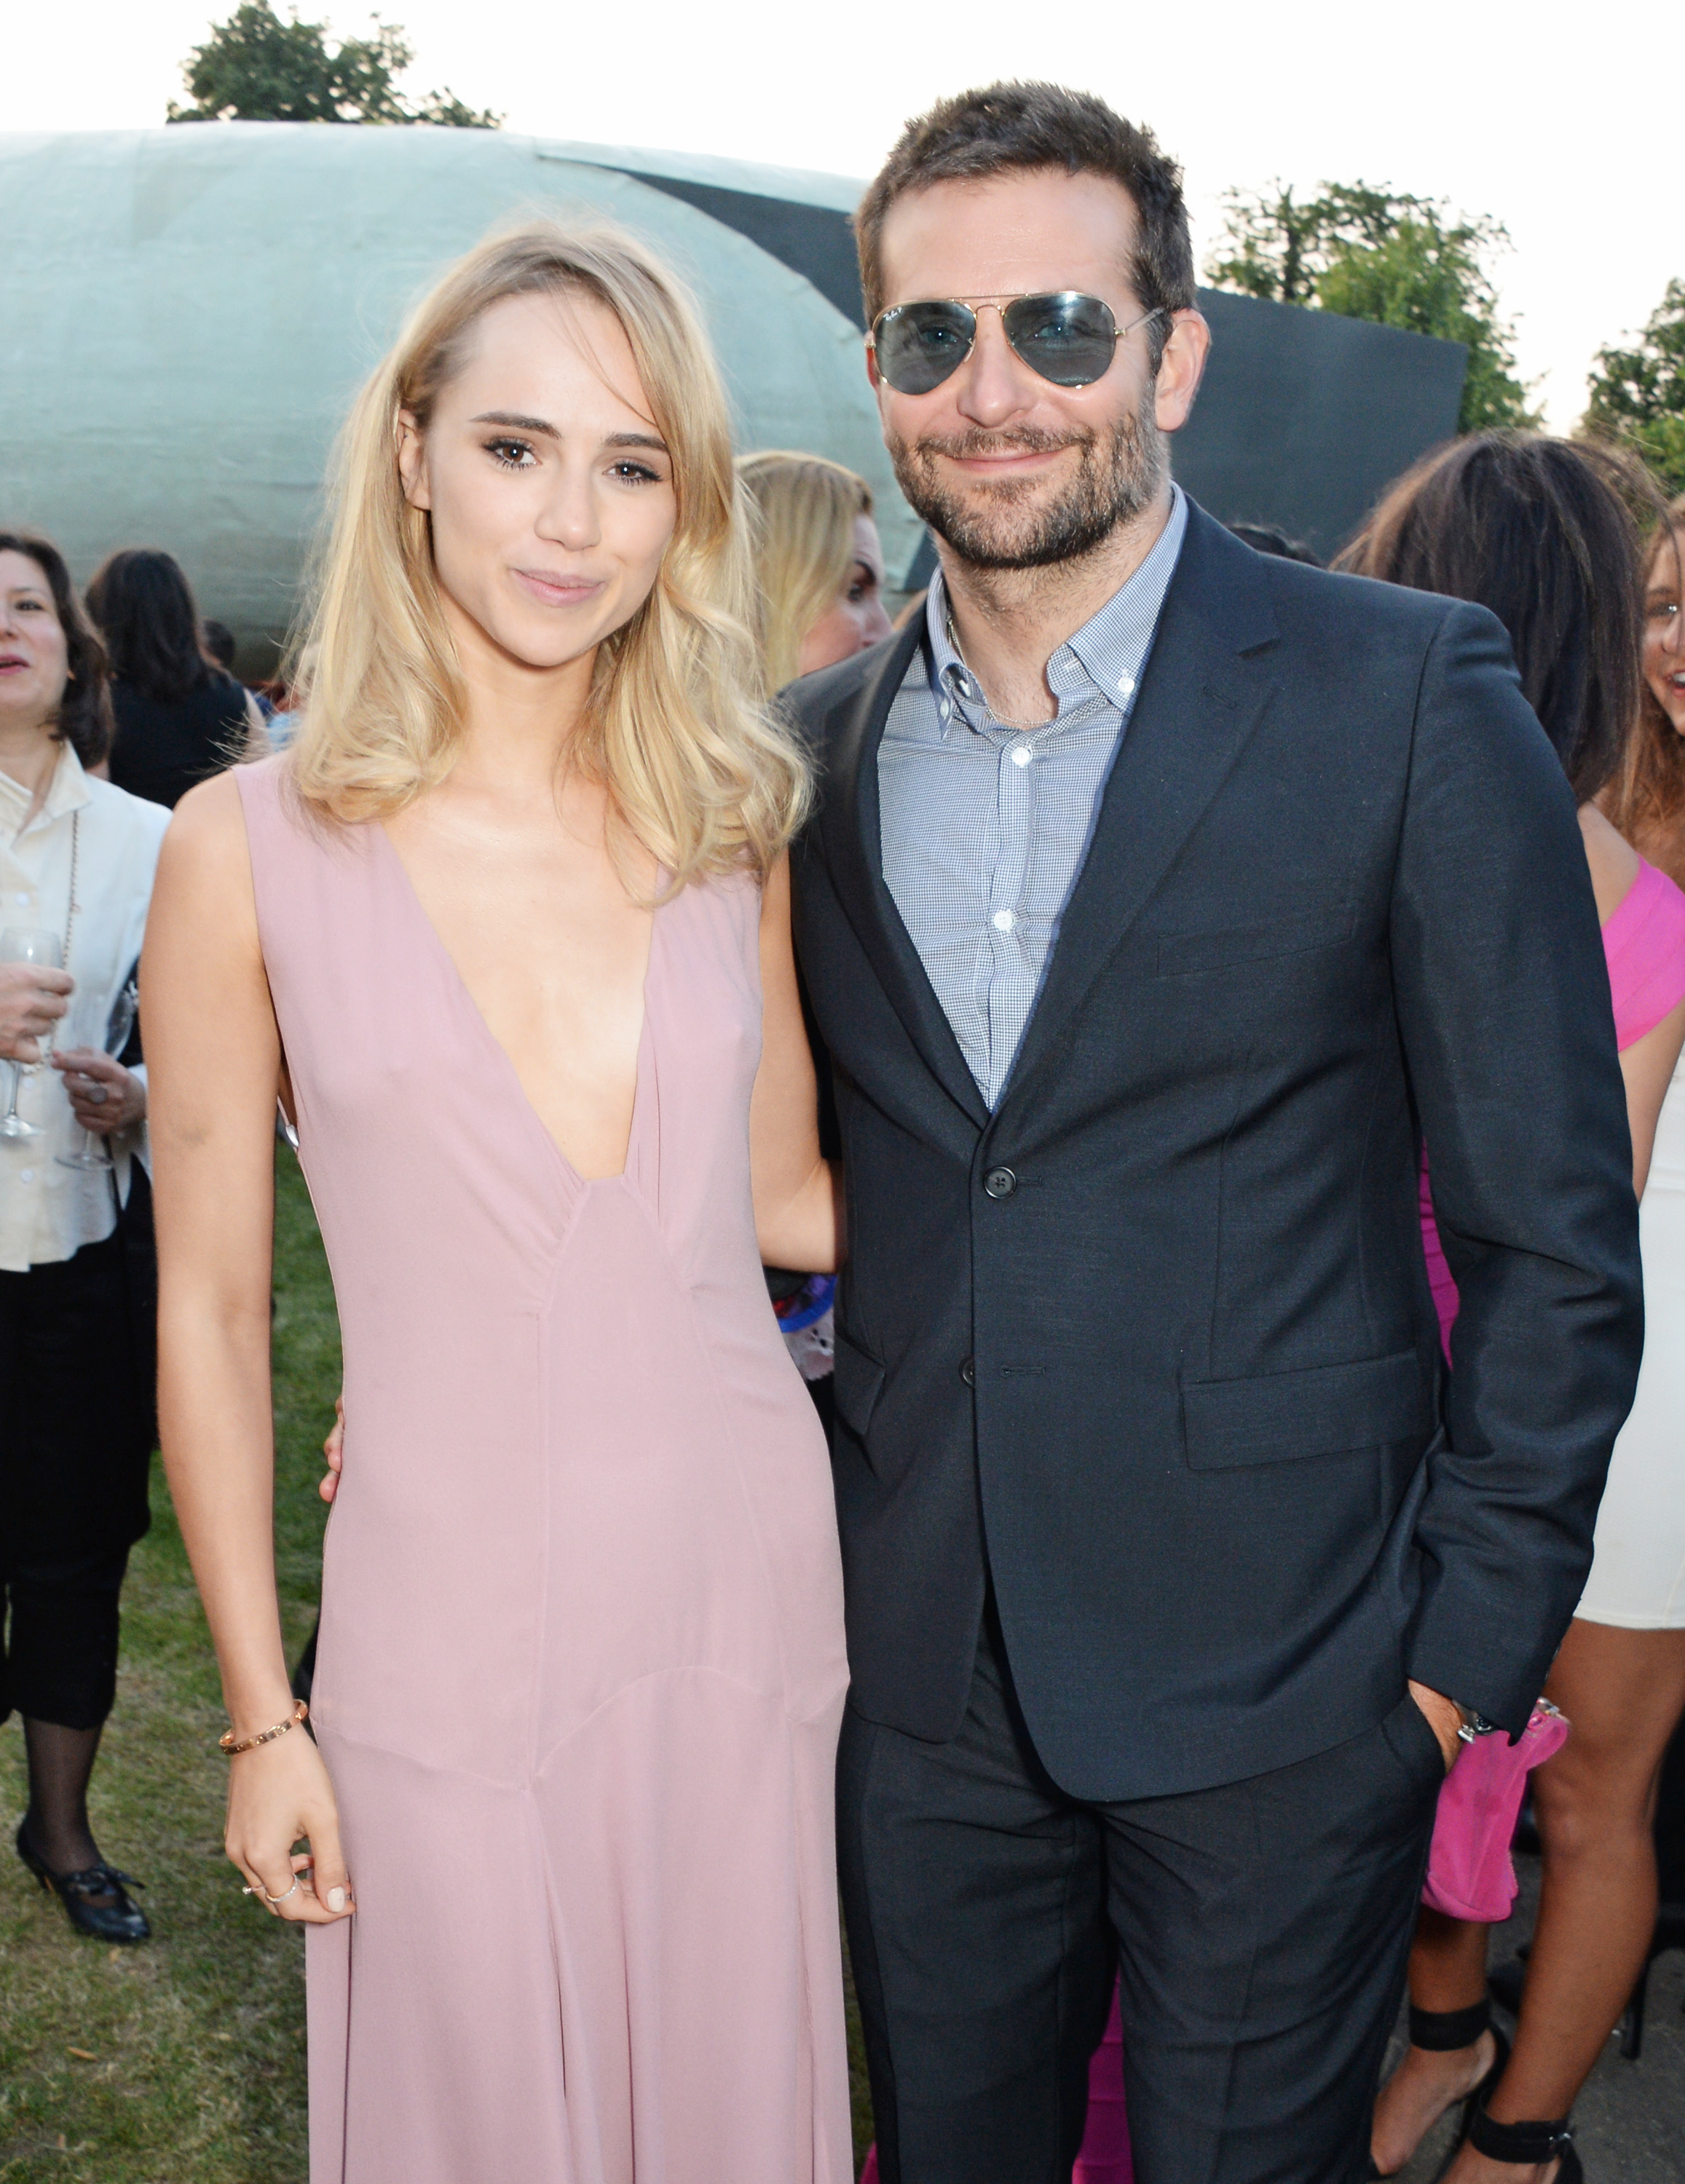 Suki Waterhouse and Bradley Cooper attend The Serpentine Gallery Summer Party co-hosted by Brioni at The Serpentine Gallery on July 1, 2014, in London, England